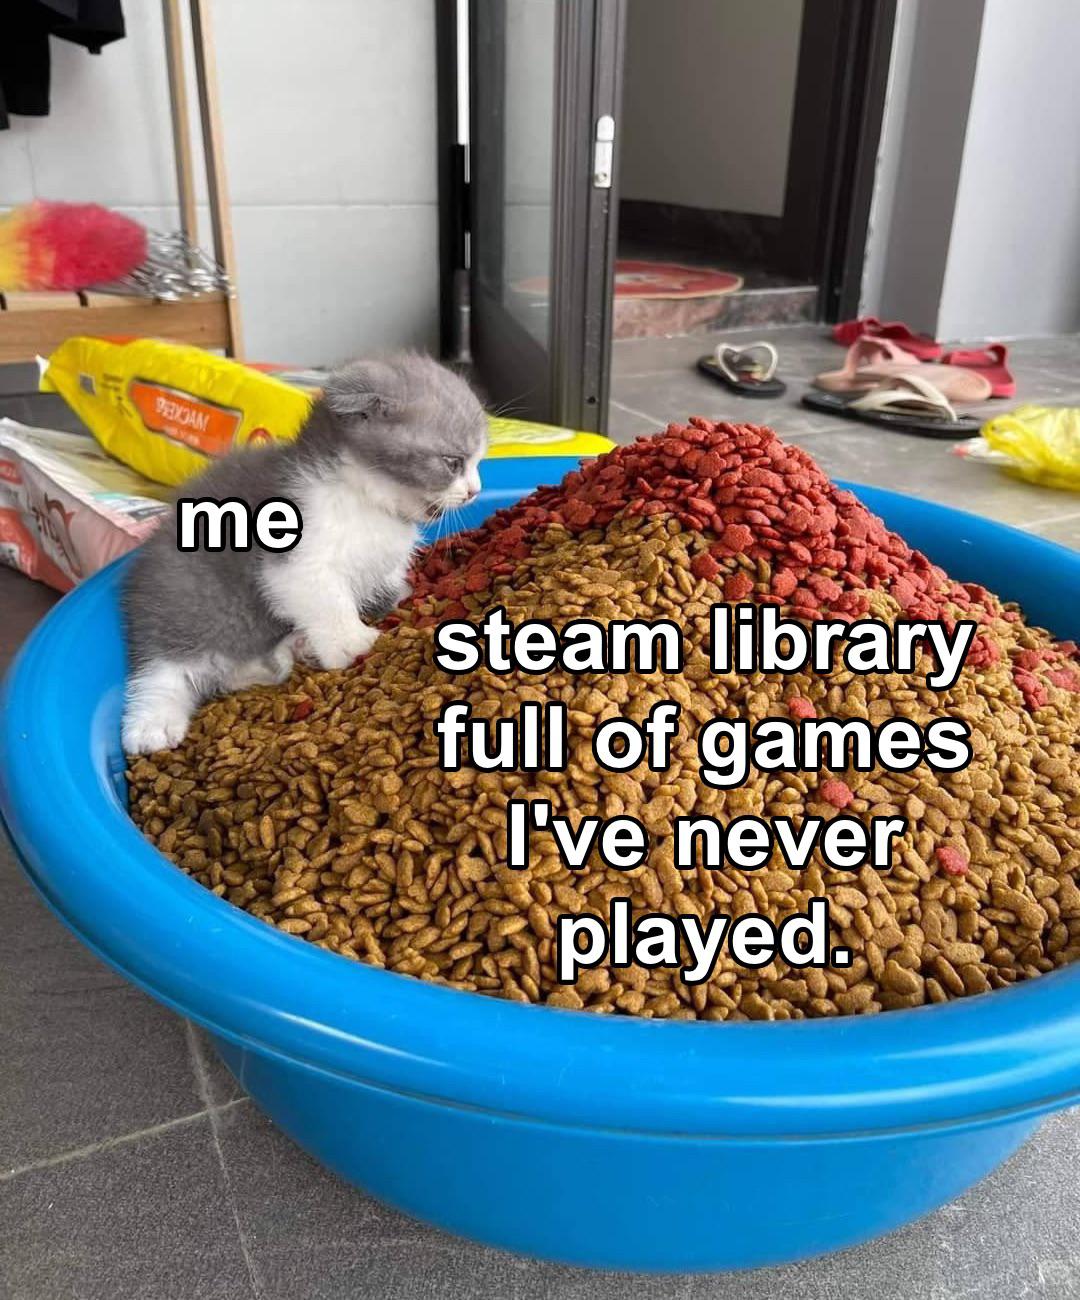 gaming memes - connect - 930AM me steam library full of games I've never played.